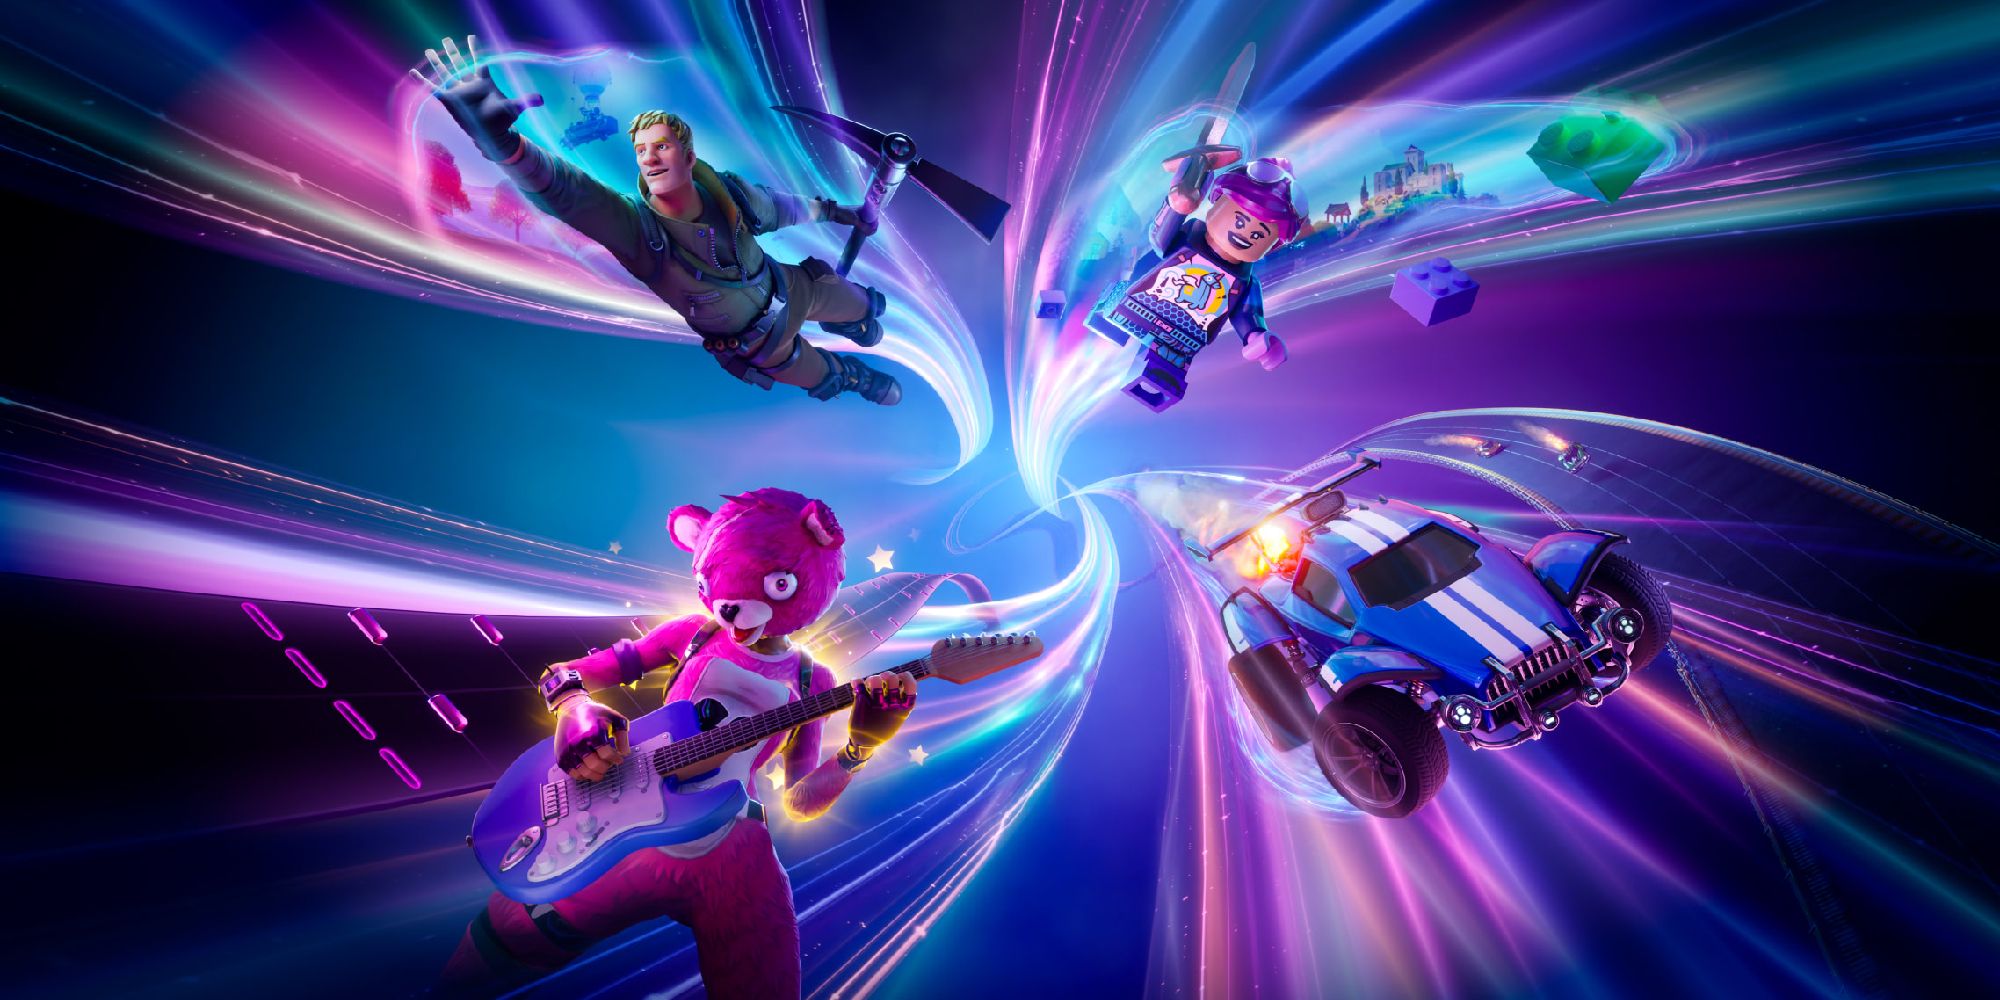 fortnite official art showing characters in different games